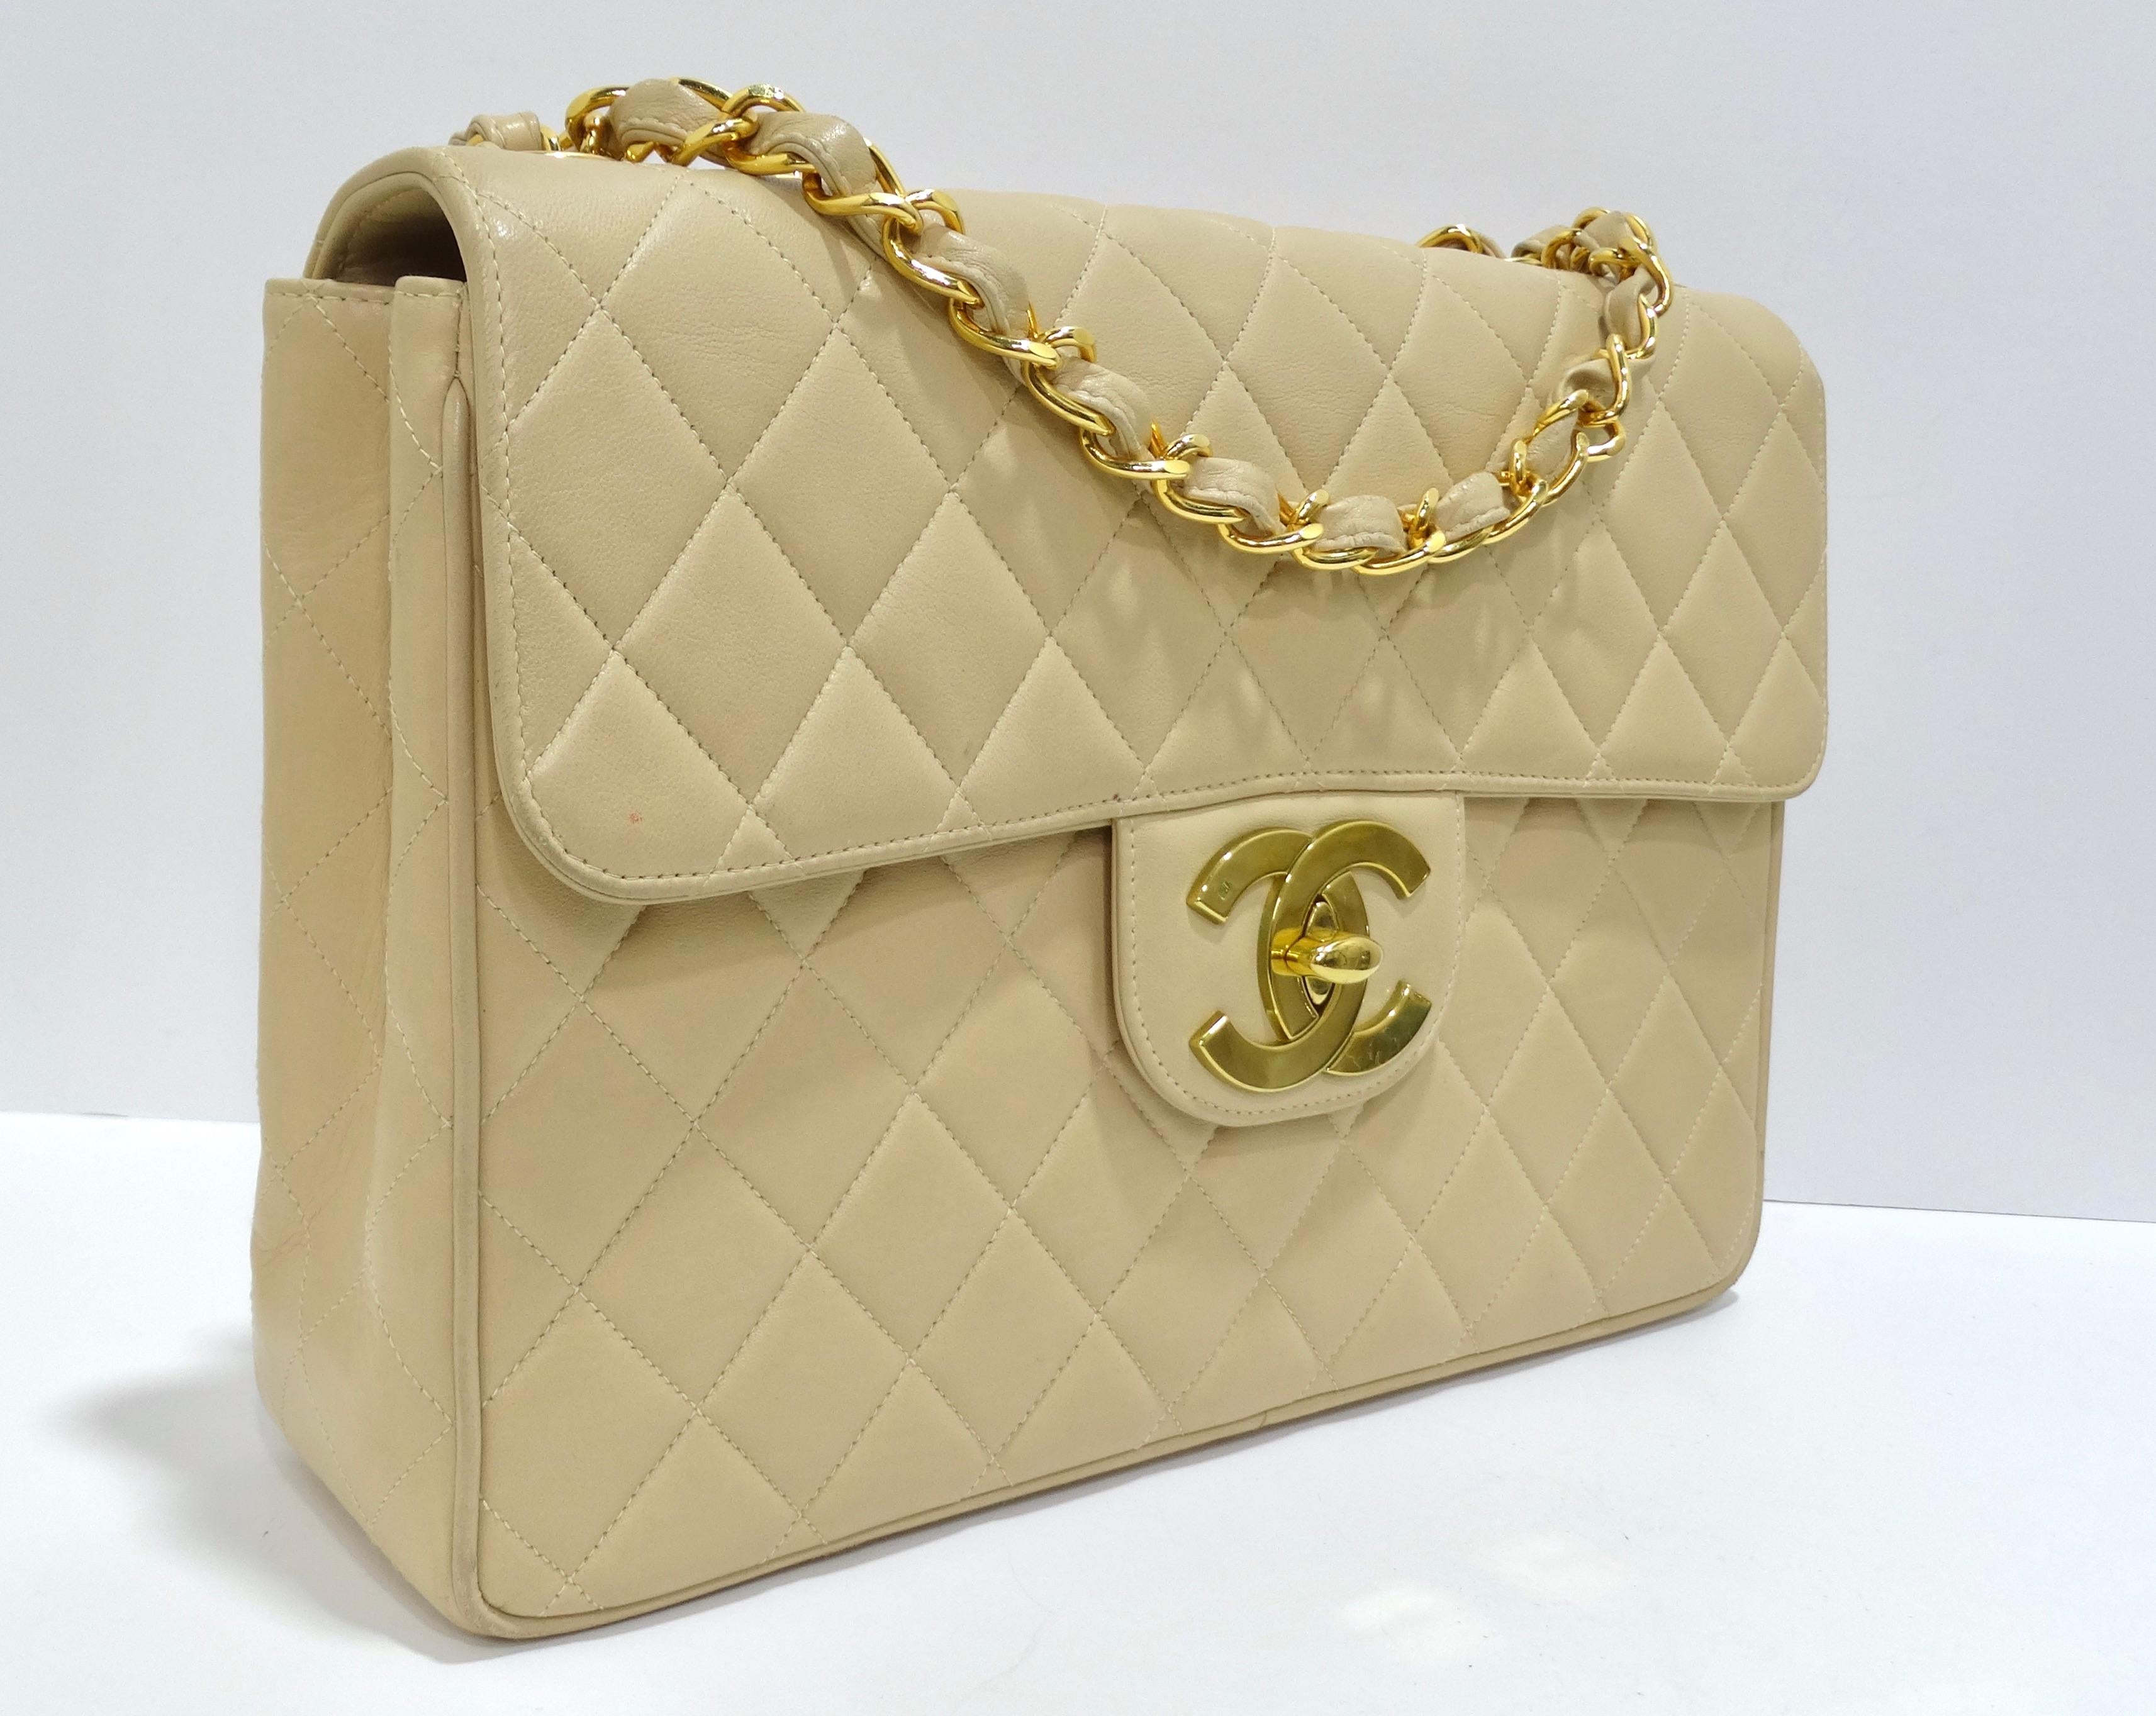 Get your hands on the most perfect vintage CHANEL! From 1996 and in amazing condition you cannot go wrong. The neutral color will take you from morning to night and through any activity your day brings. This Chanel is large, making it a JUMBO size,